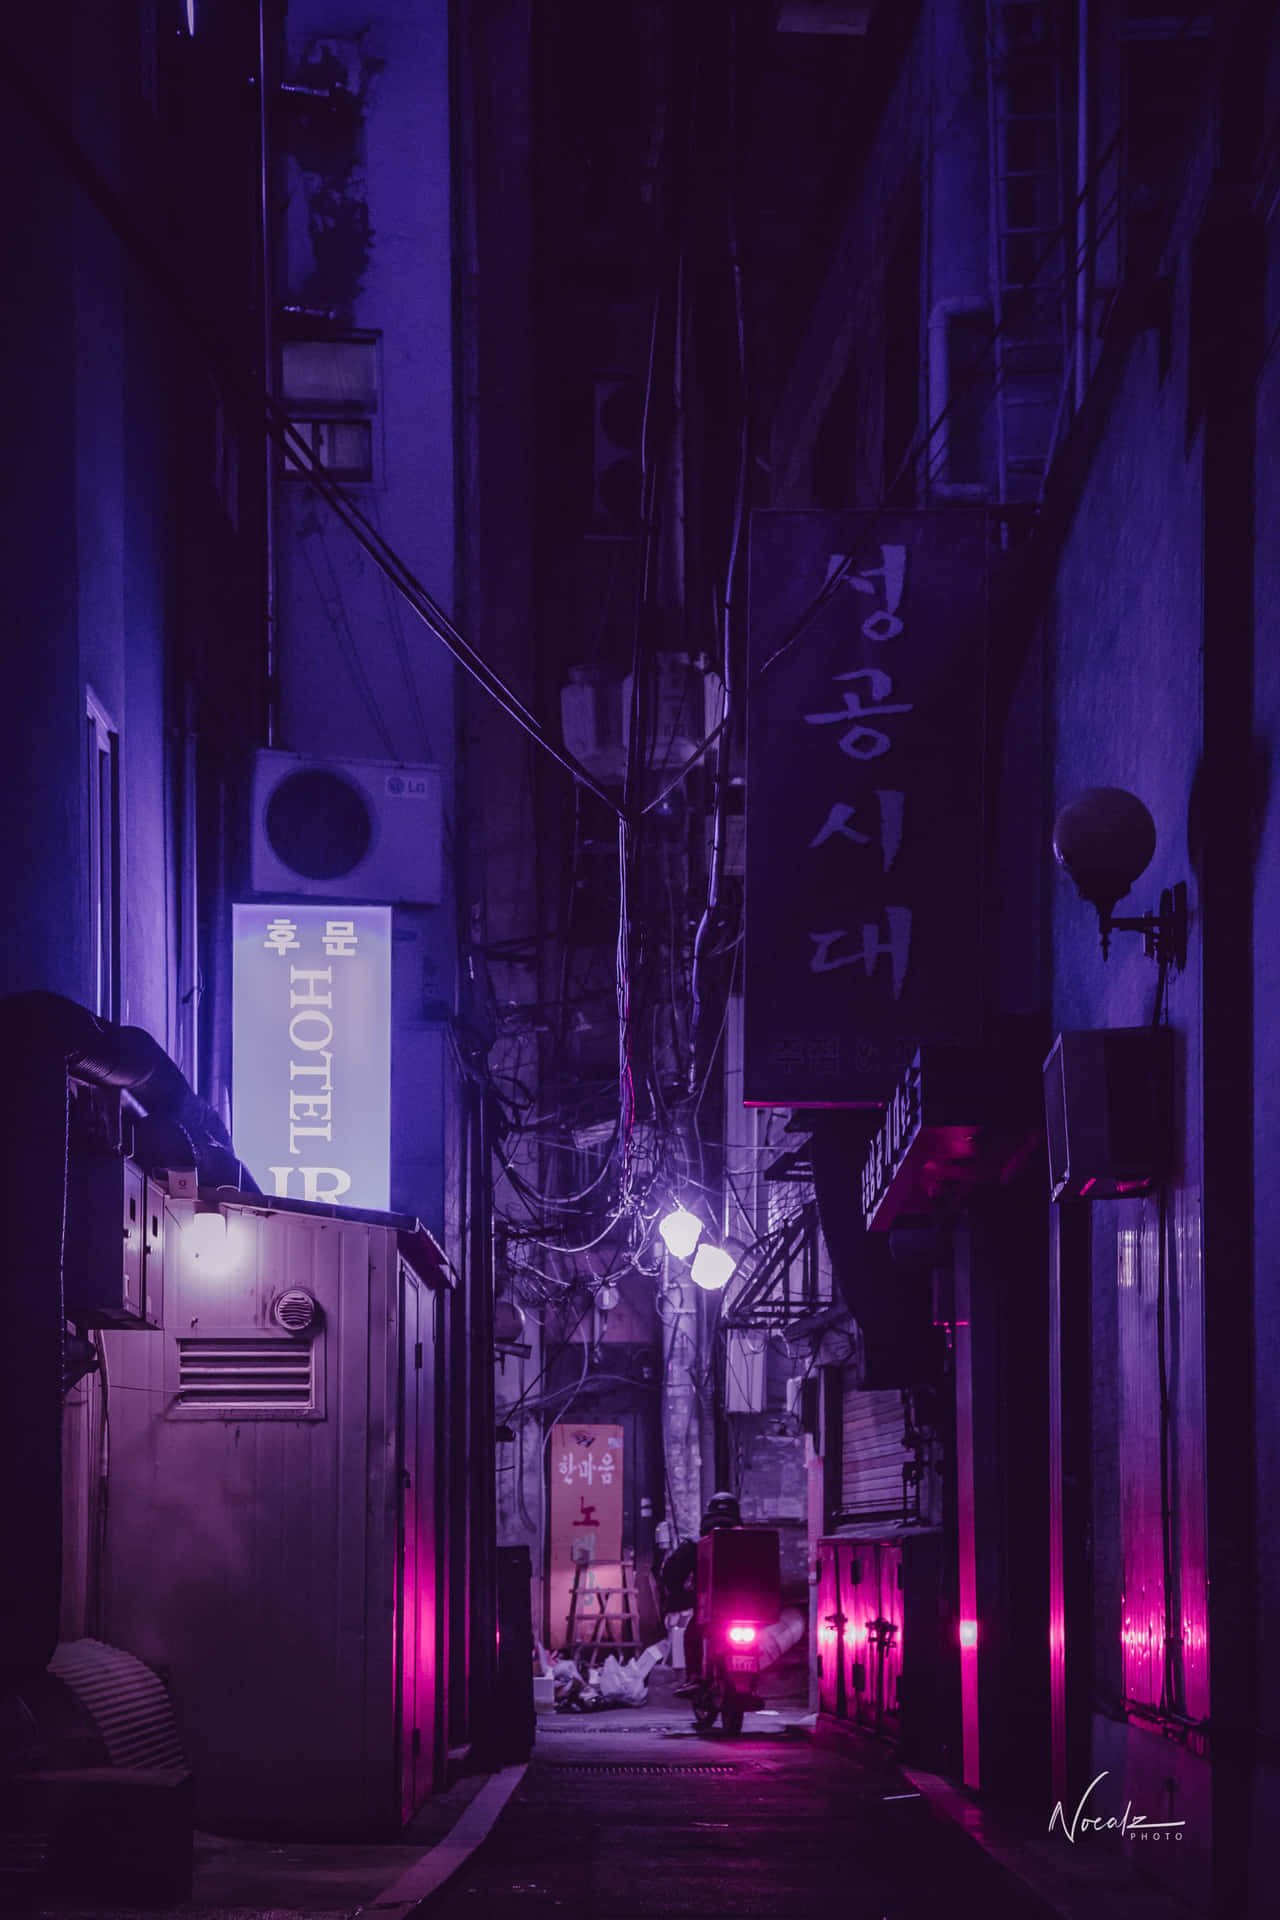 A Street With Neon Lights And A Bike Wallpaper